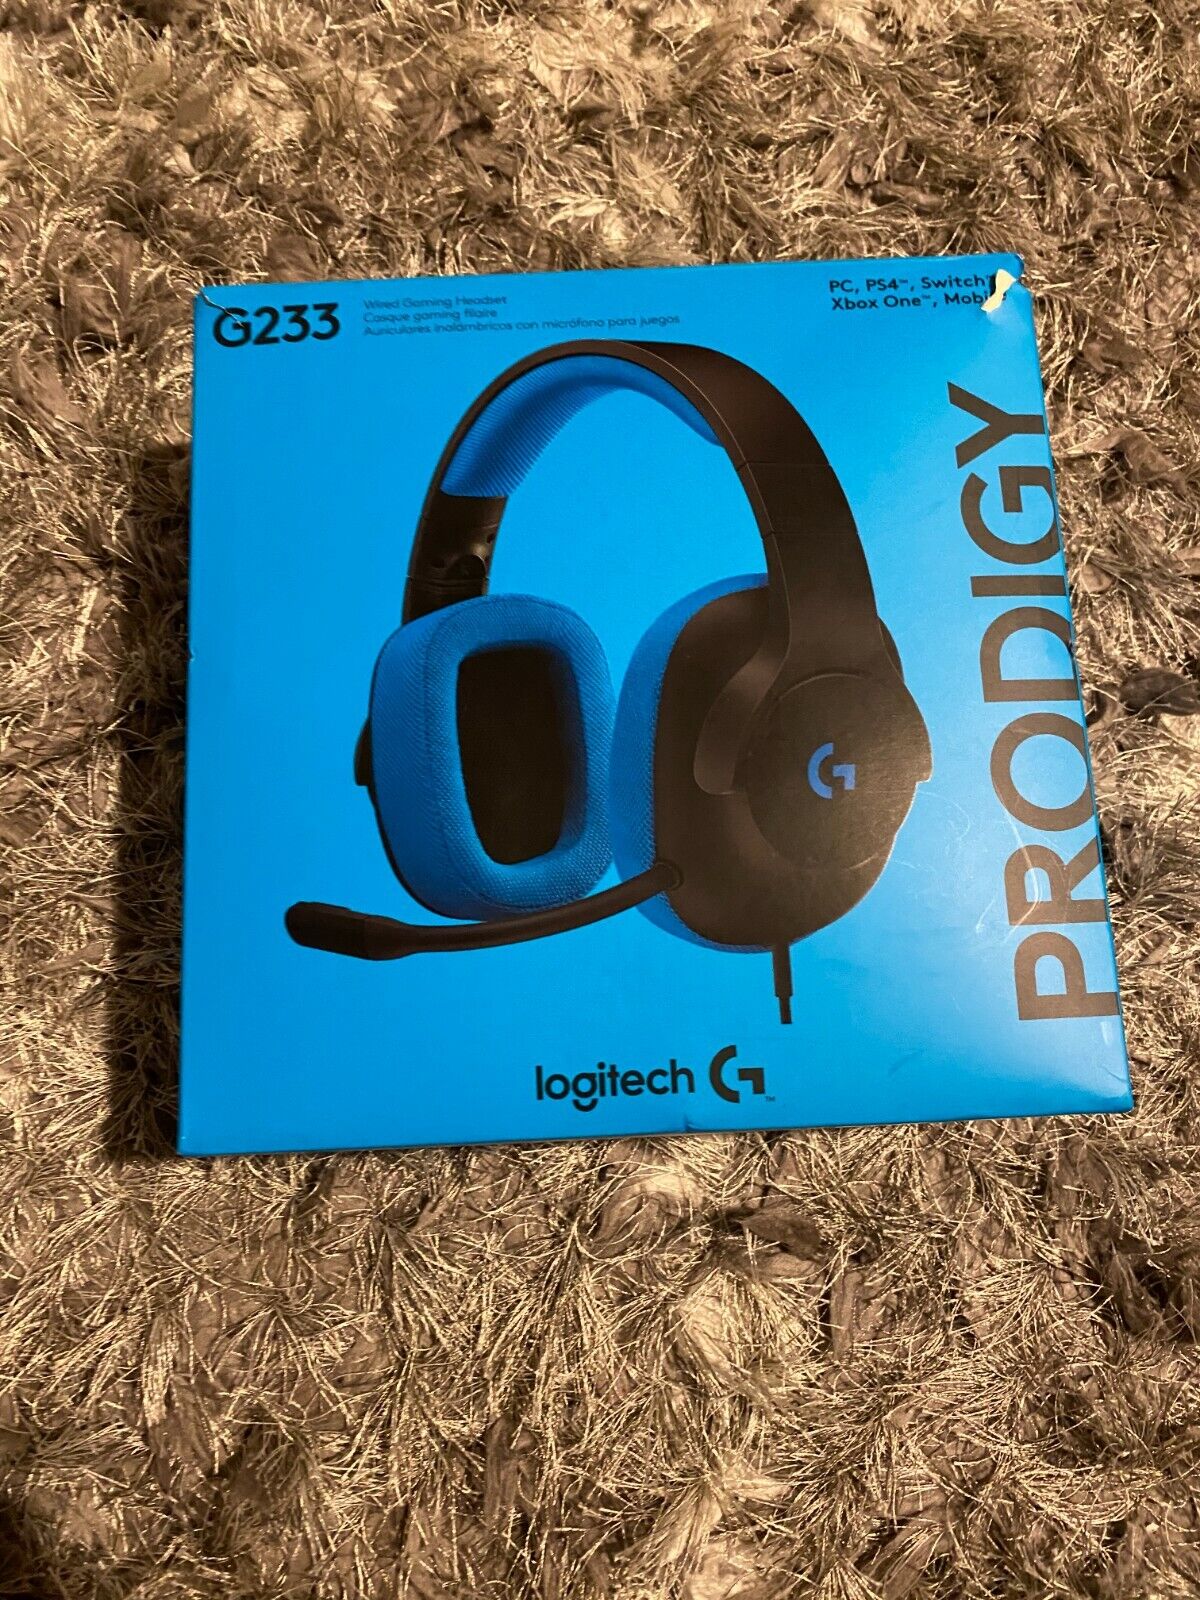 invadere ansvar positur Logitech G233 Prodigy Blue/Black Gaming Headset With Microphone For  PS4/PC/Xbox | eBay